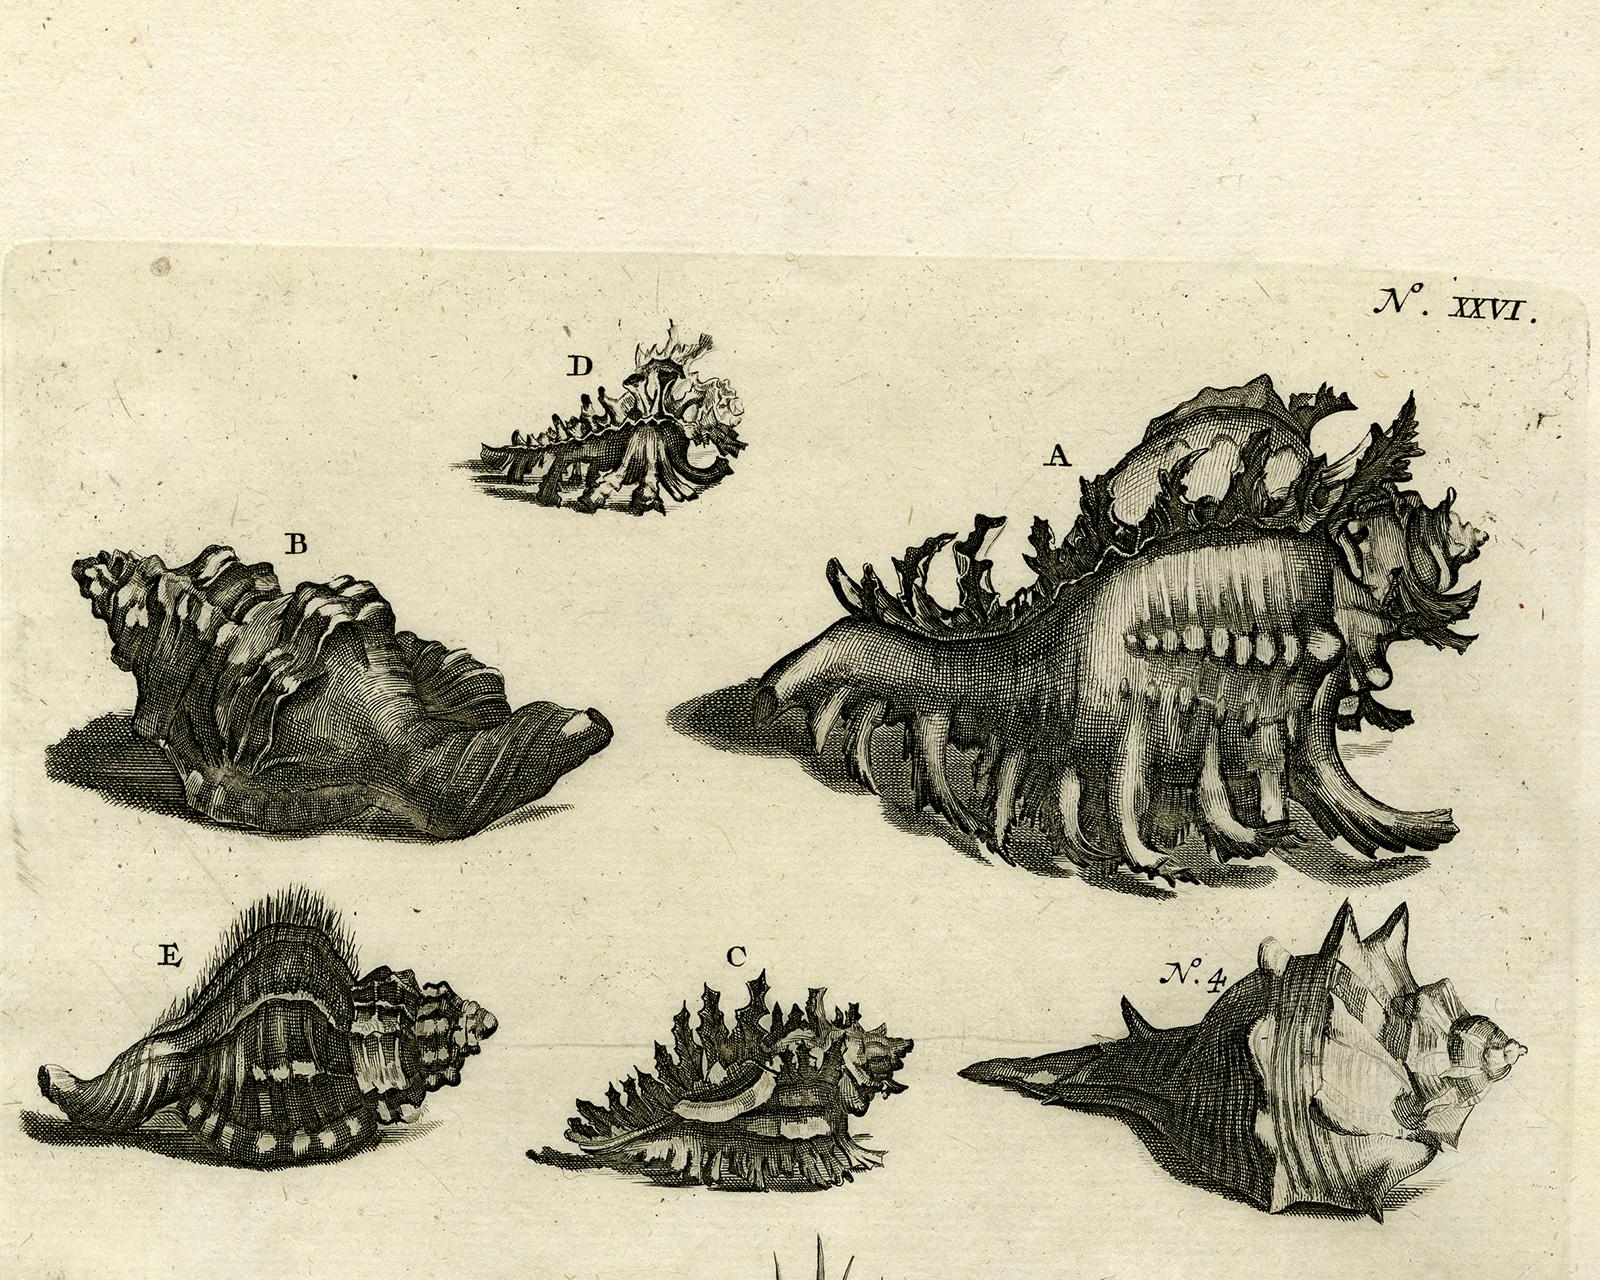 Snail and Mollusks - Ambonian Cabinet of Curiosities by Rumphius - 18th c. - Print by Jorg Eberhardt Rumph